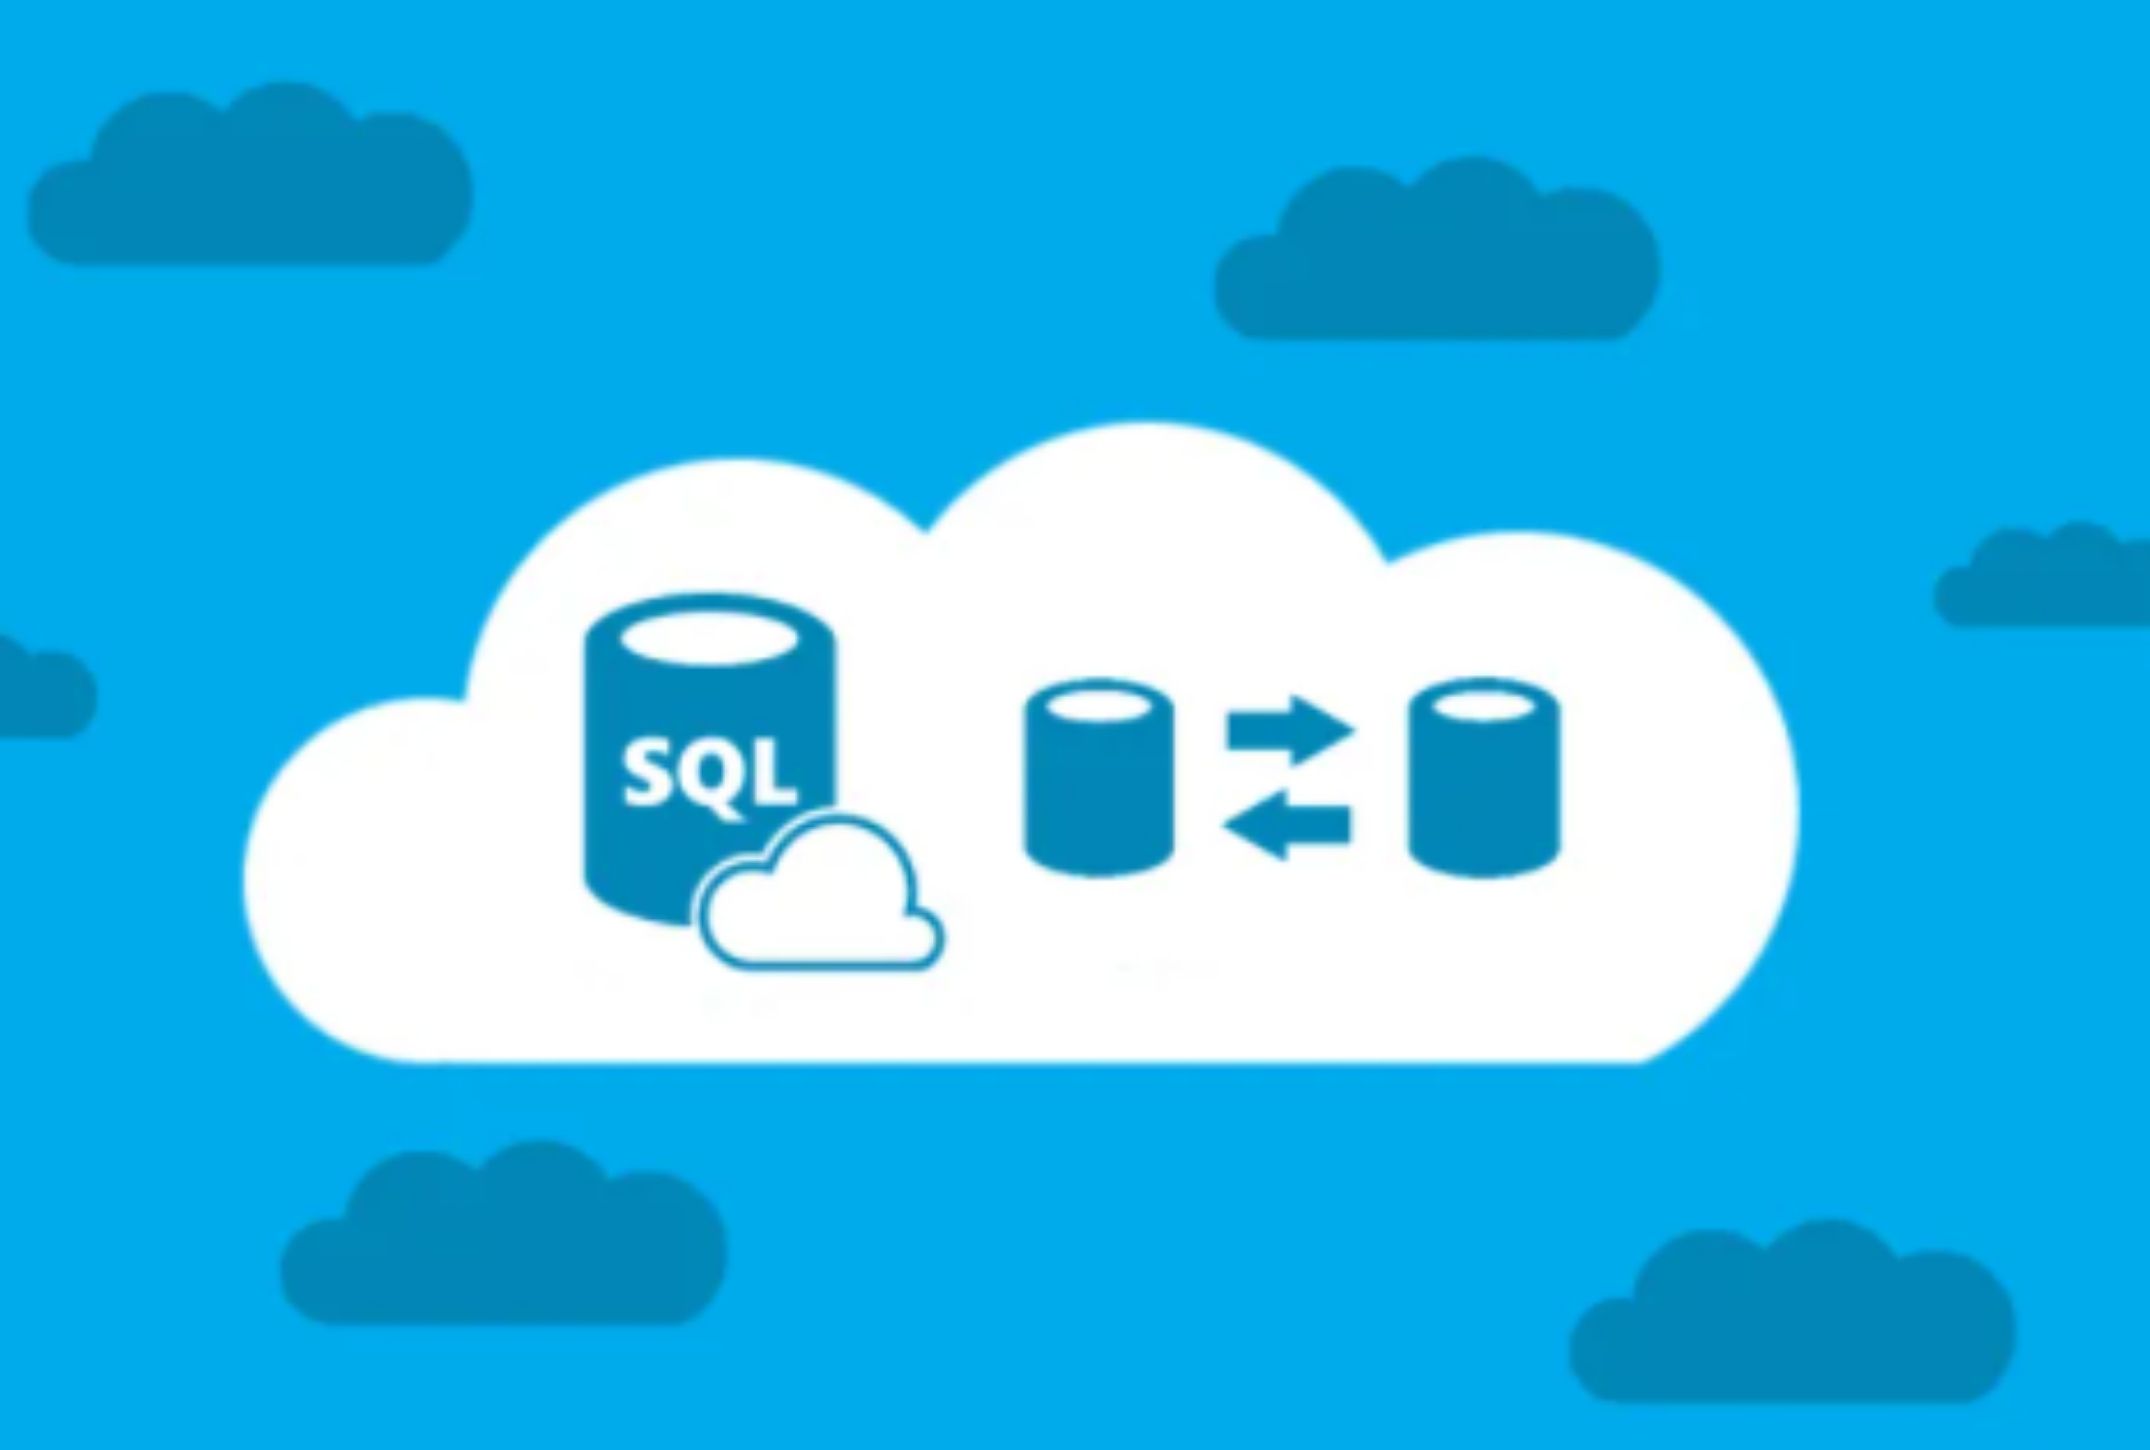 Working with SQL Server Azure: Read and Know